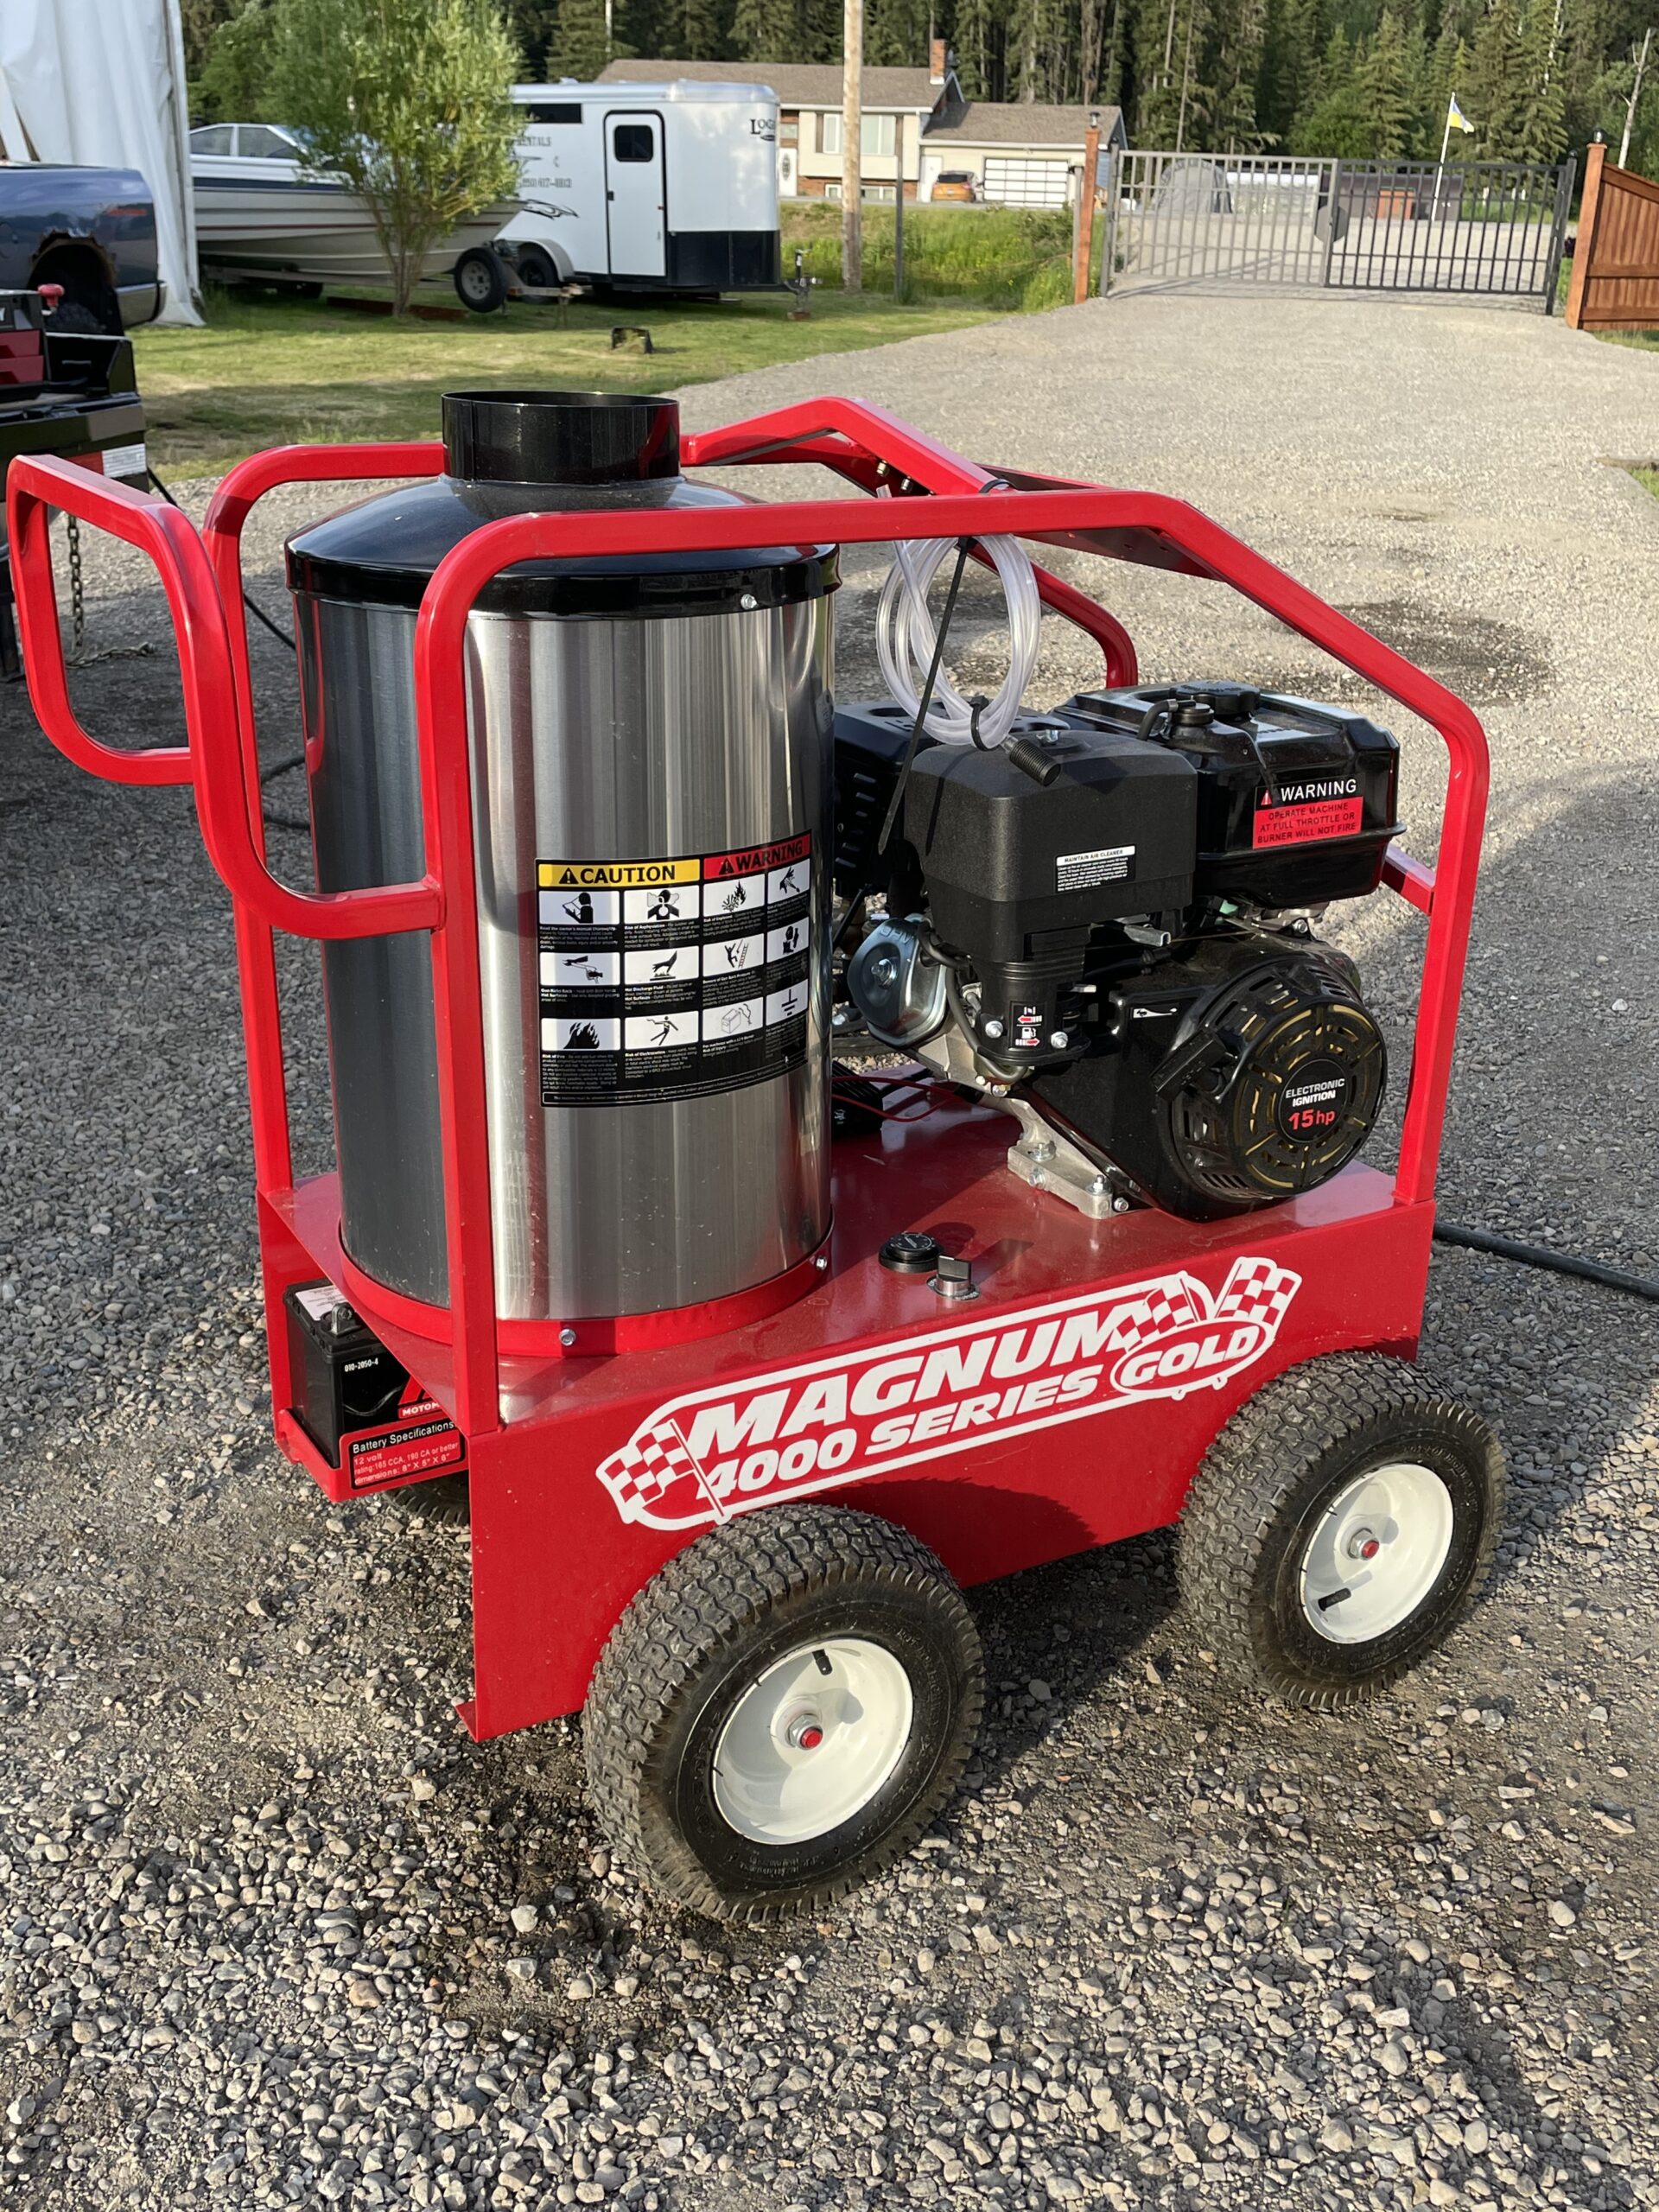 Easy Kleen Magnum 4000 Psi Hot Water Pressure Washer